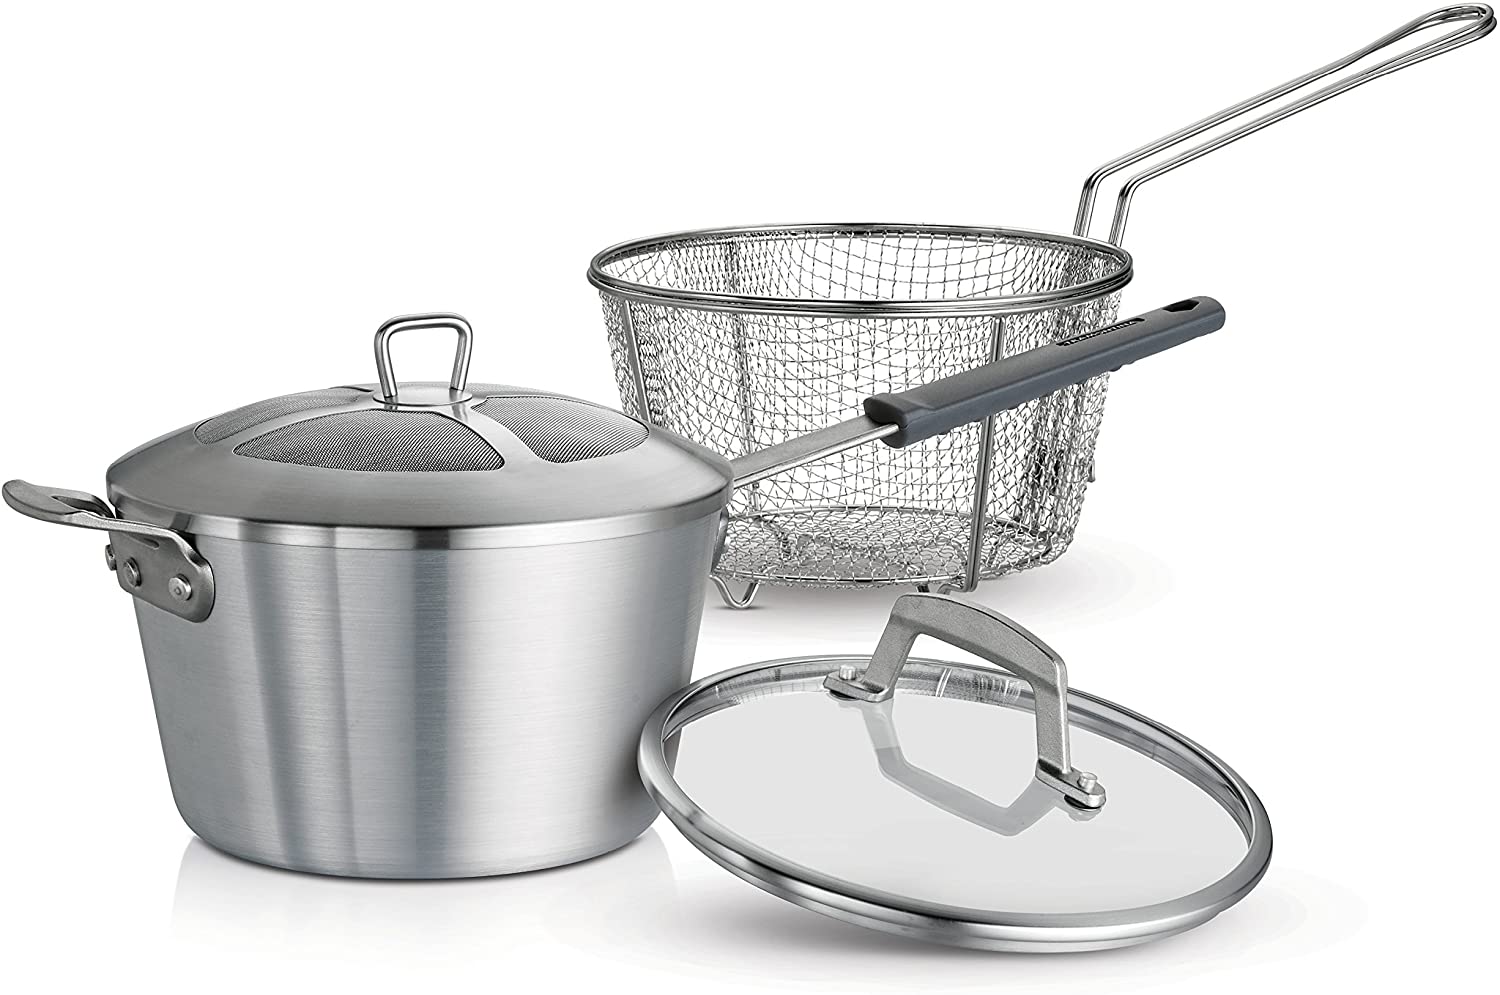 Tramontina Covered Sauce Pan with Helper Handle Stainless Steel